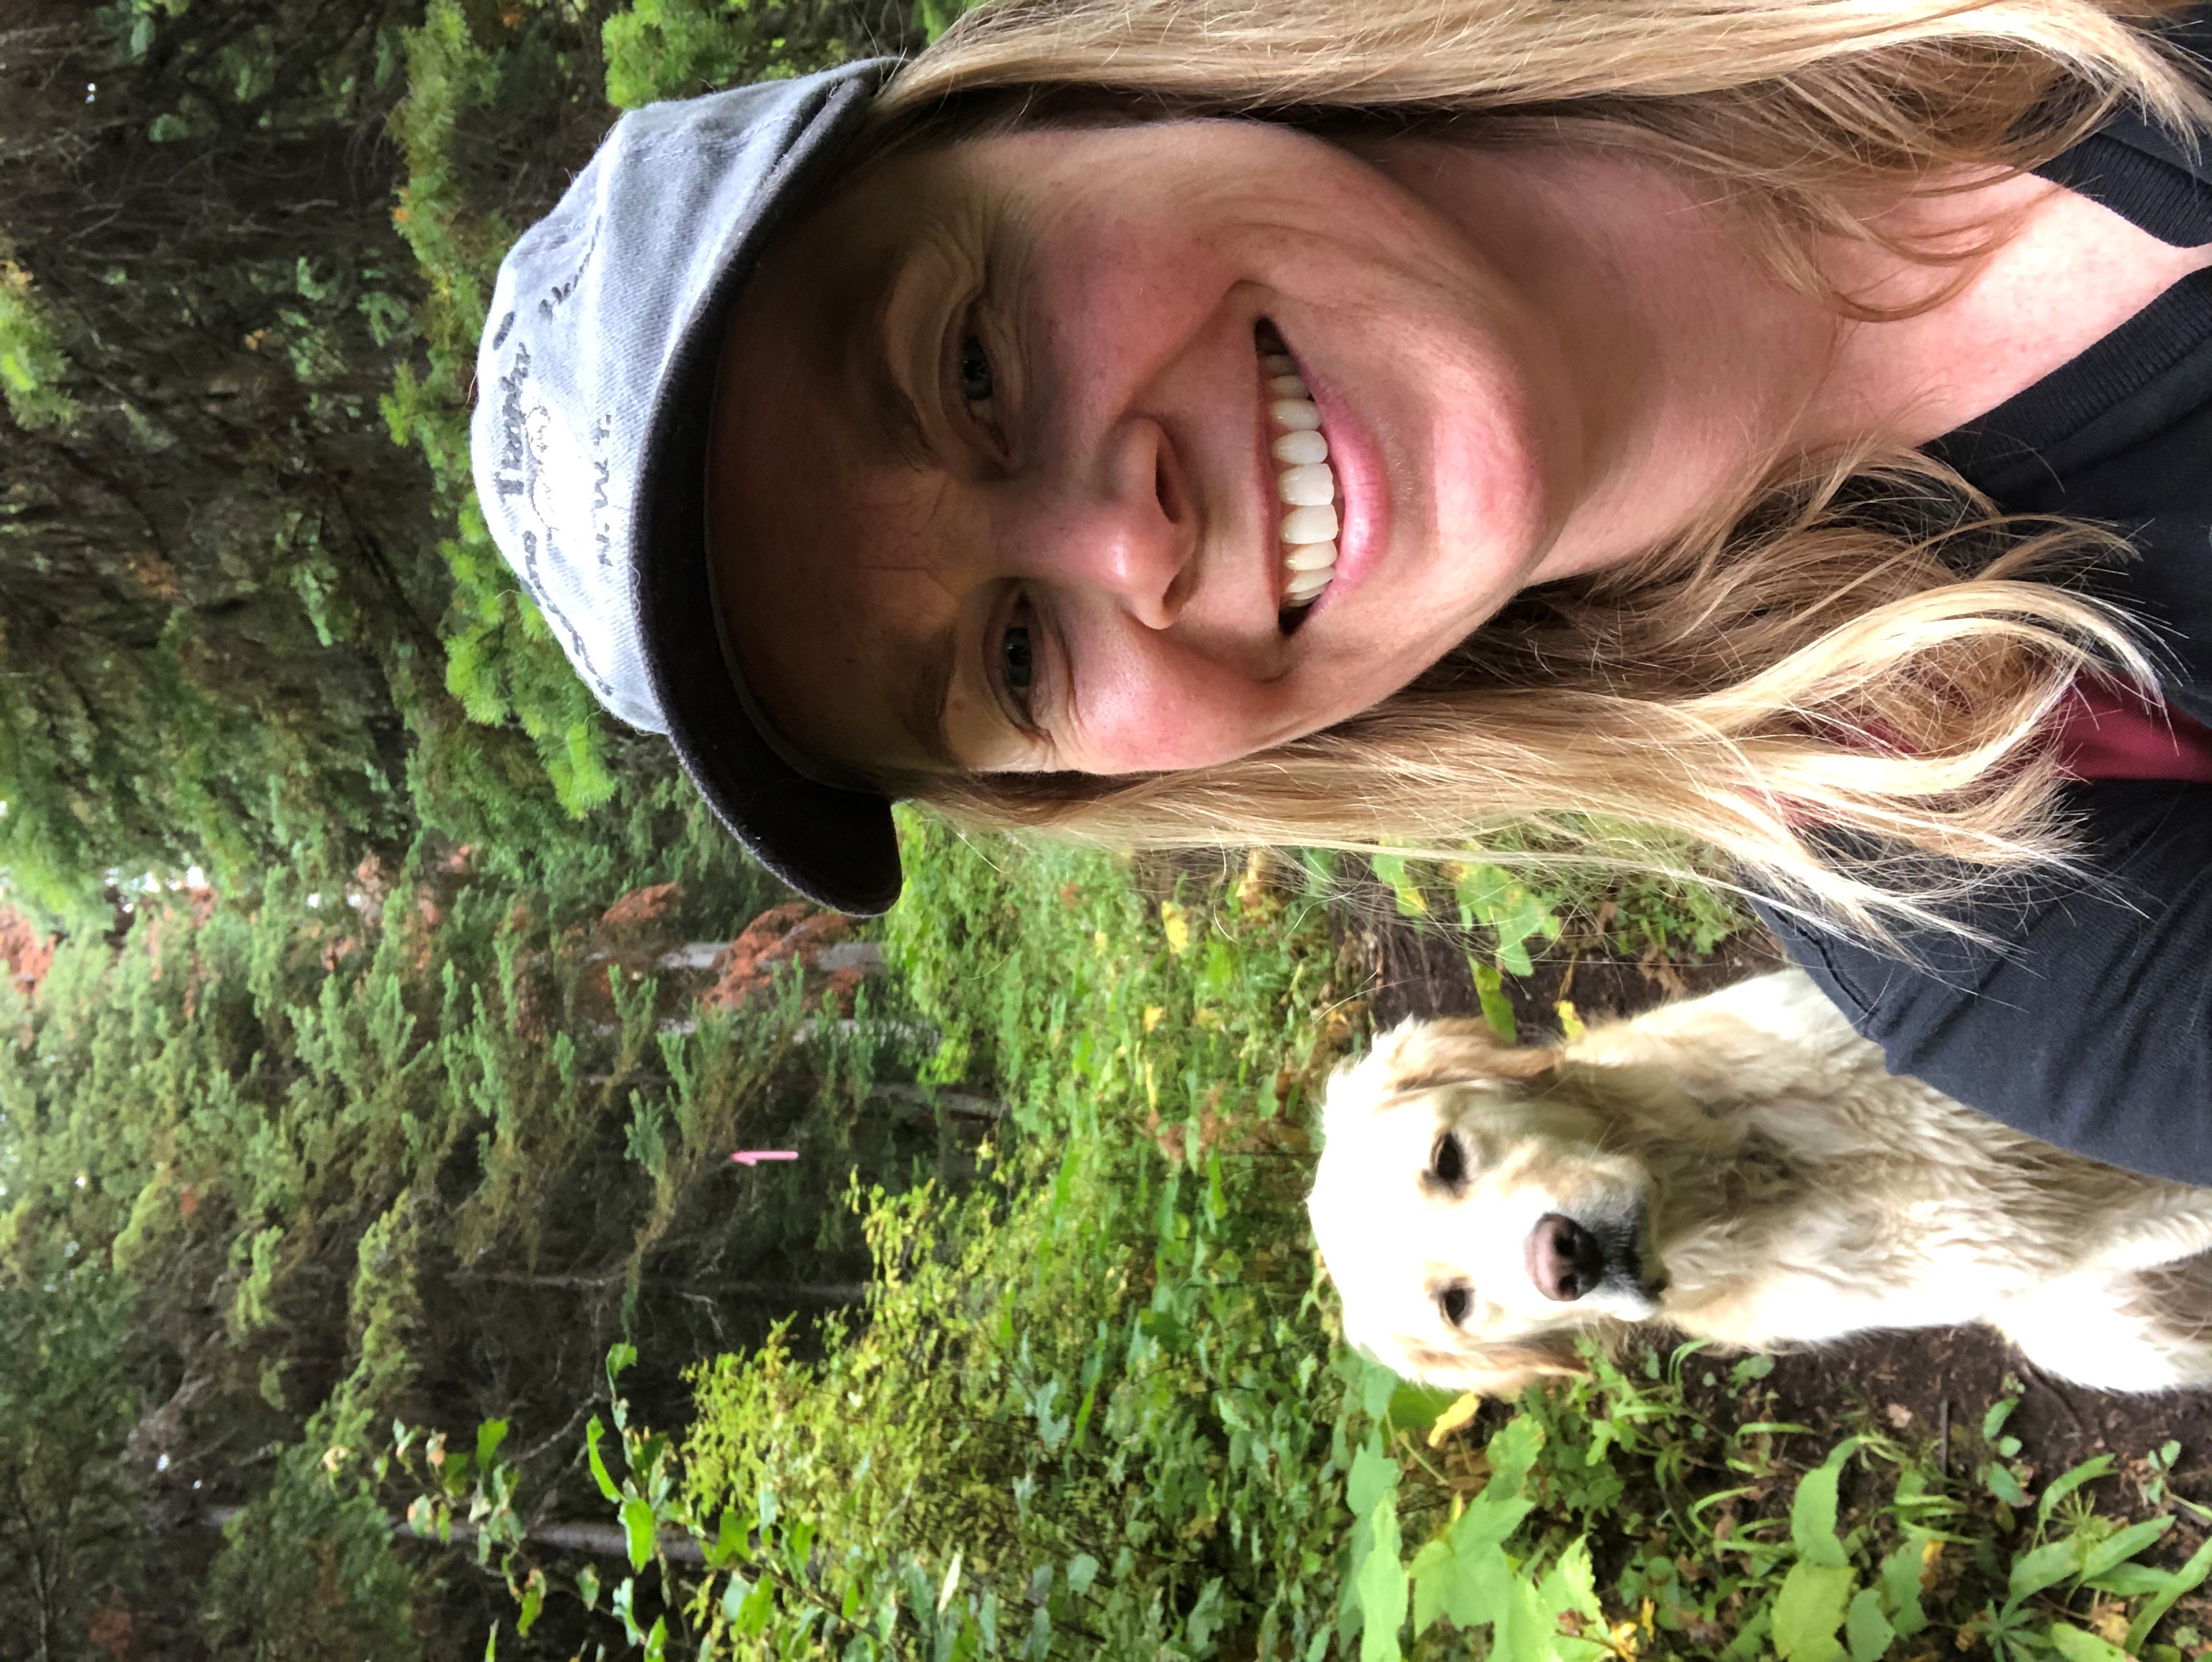 A smiling woman with long blond hair in a blue ball cap takes a selfie in a forest with her cream coloured dog behind her.